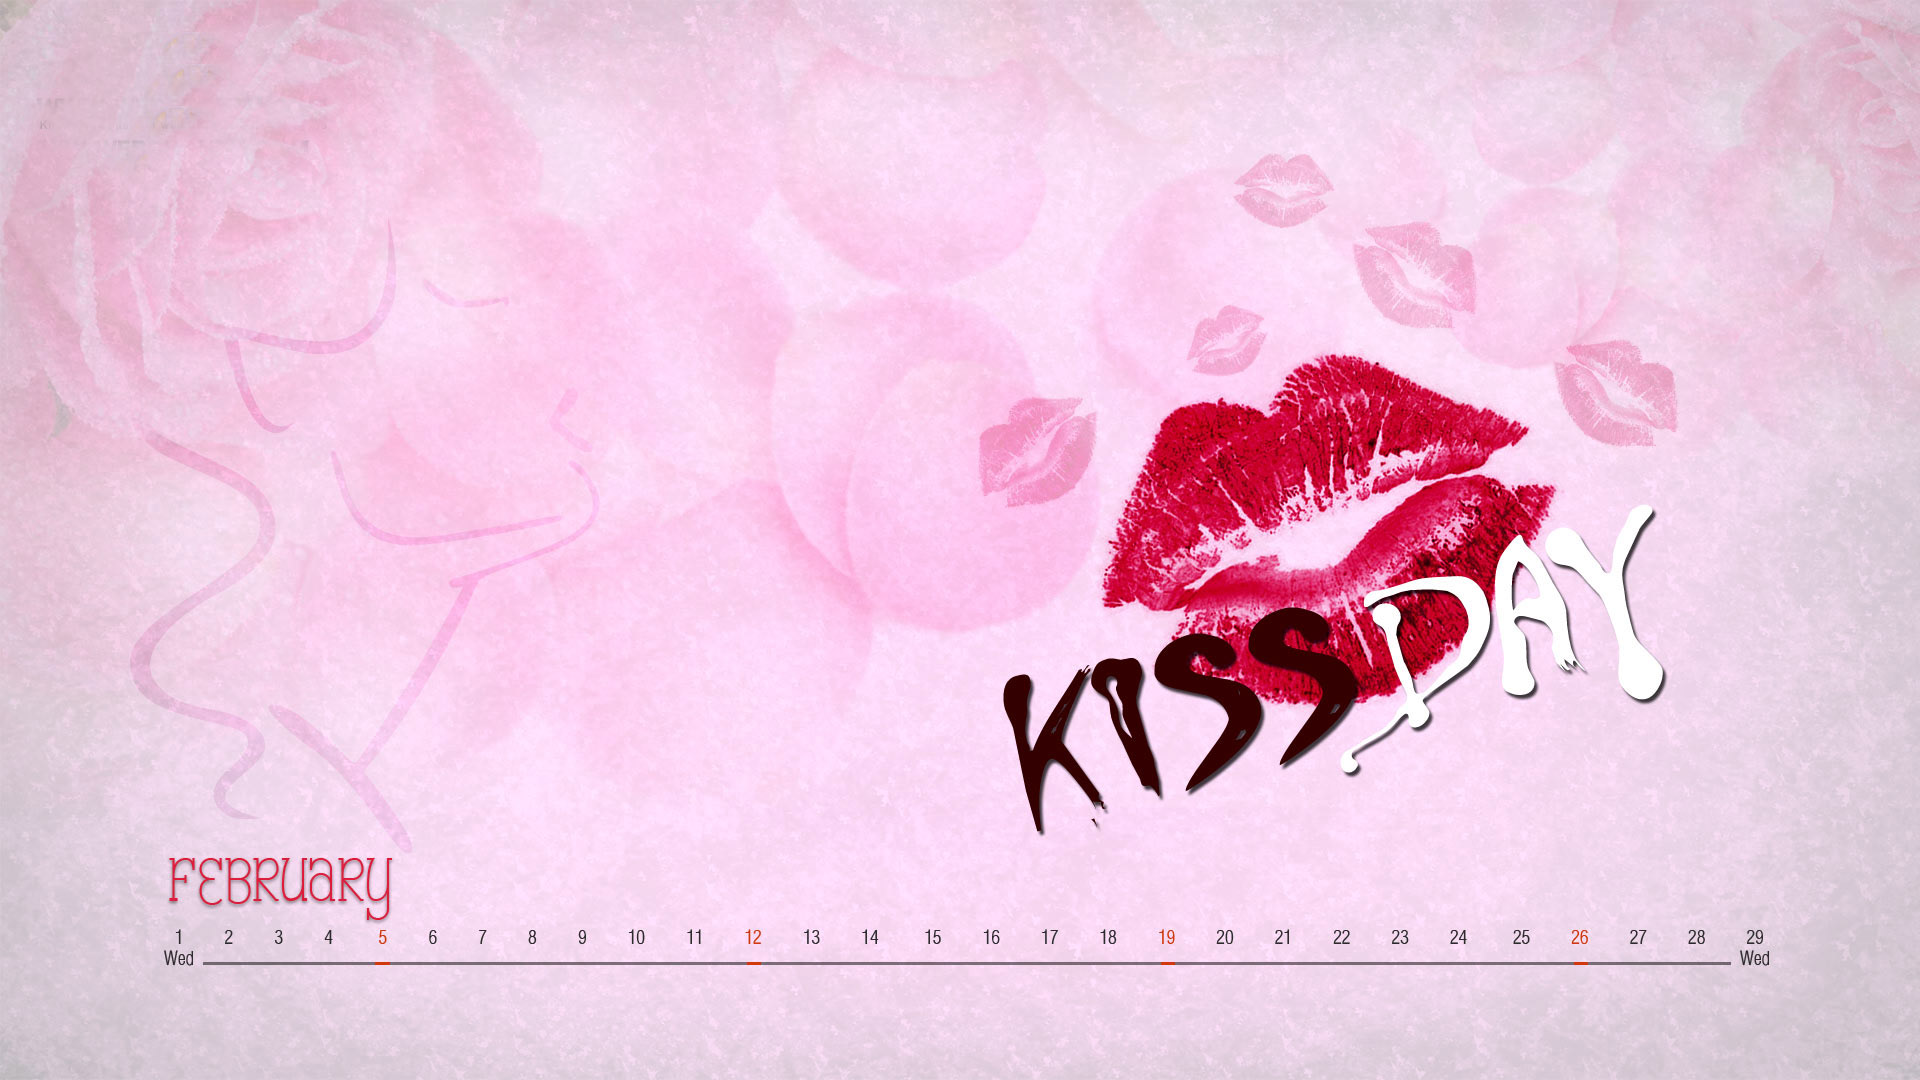 Nice Cute Message of Kiss Day Wallpaper Only hd wallpapers